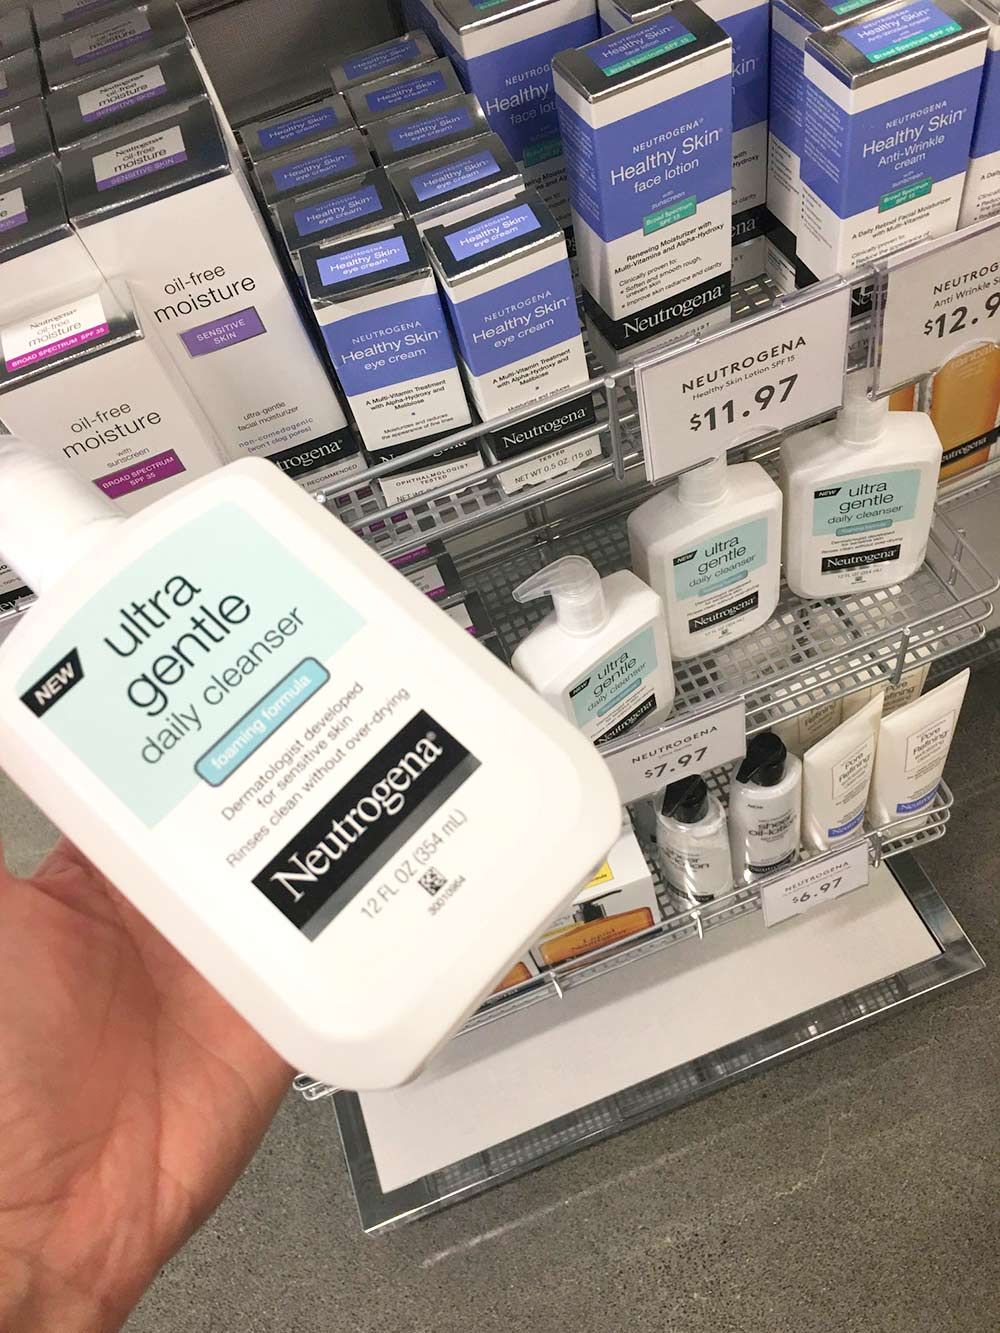 I Didn’t Know They Carried Drugstore Products in the Beauty Section at Nordstrom Rack